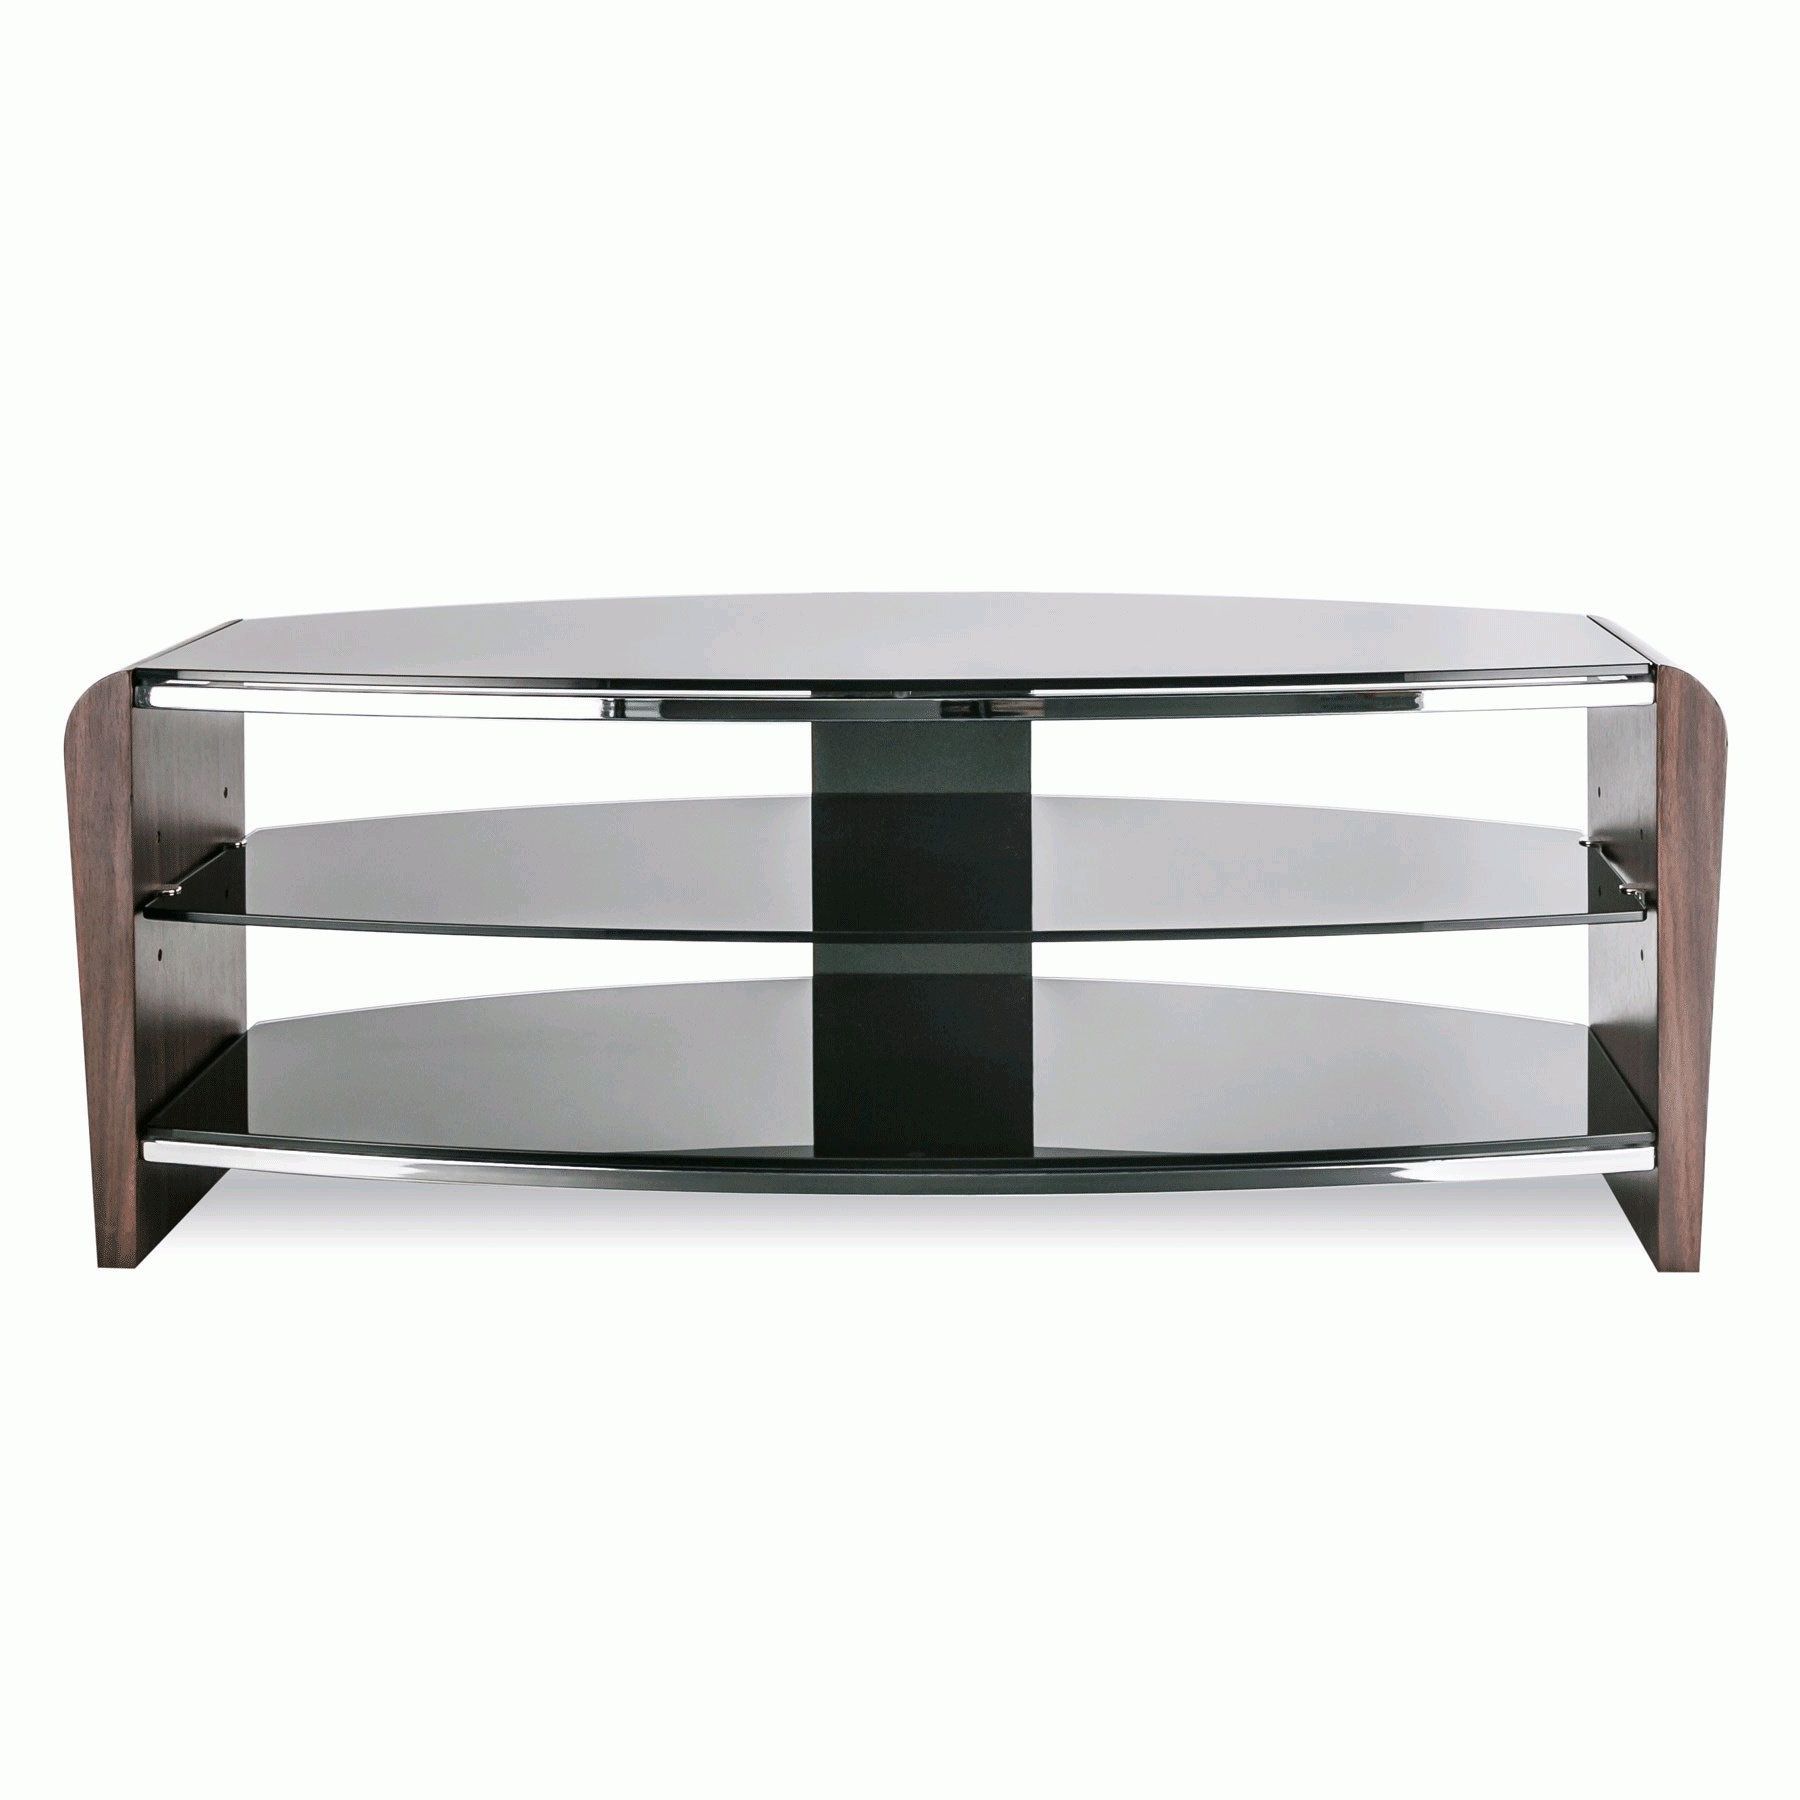 Alphason Francium 110cm Walnut Tv Stand For Up To 50" Tvs Intended For 2018 Tv Stands For Tvs Up To 50" (View 20 of 25)